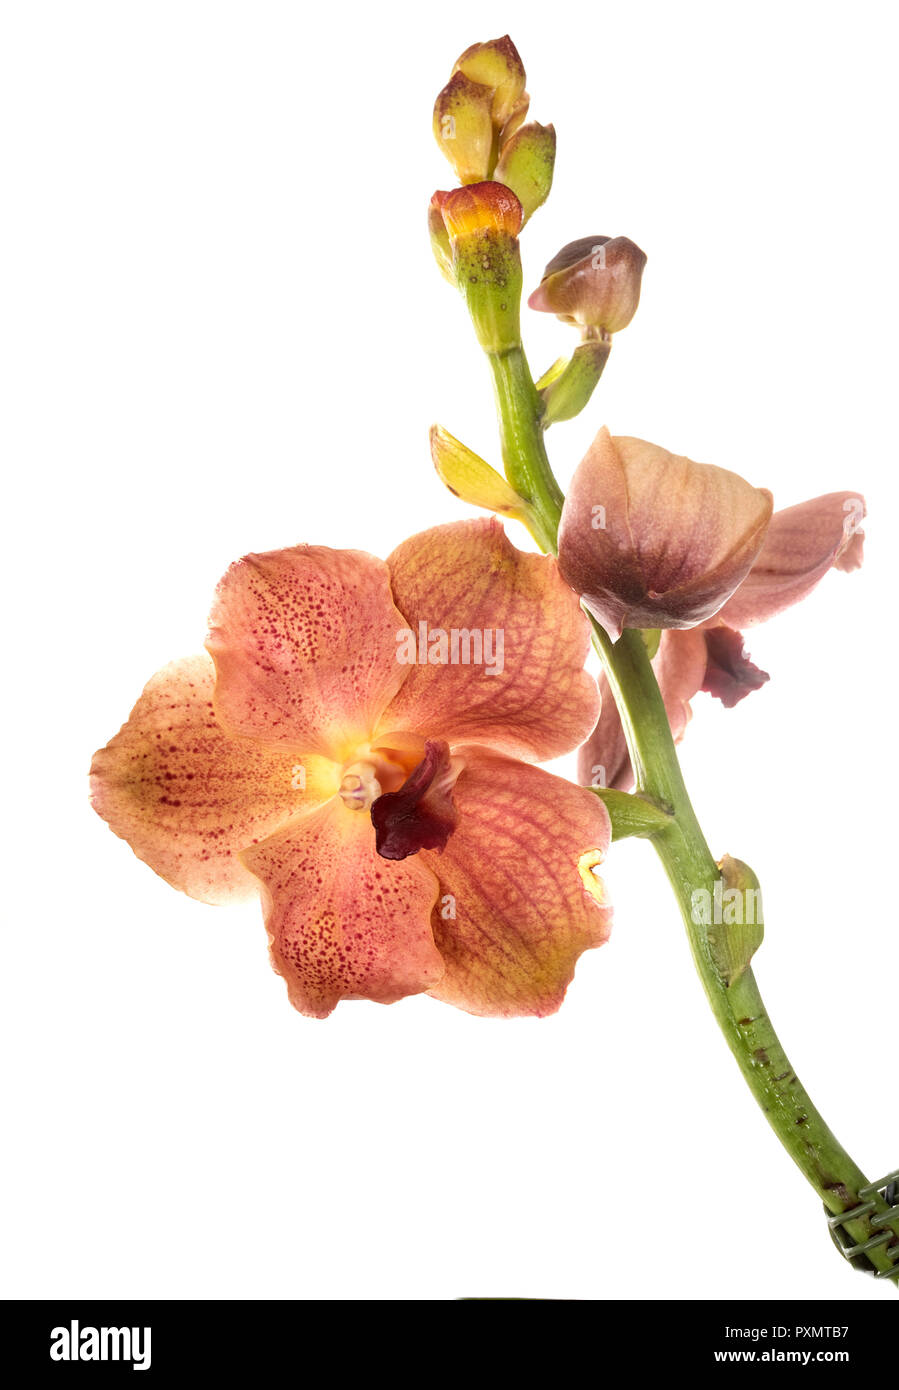 Vanda orchid in front of white background Stock Photo